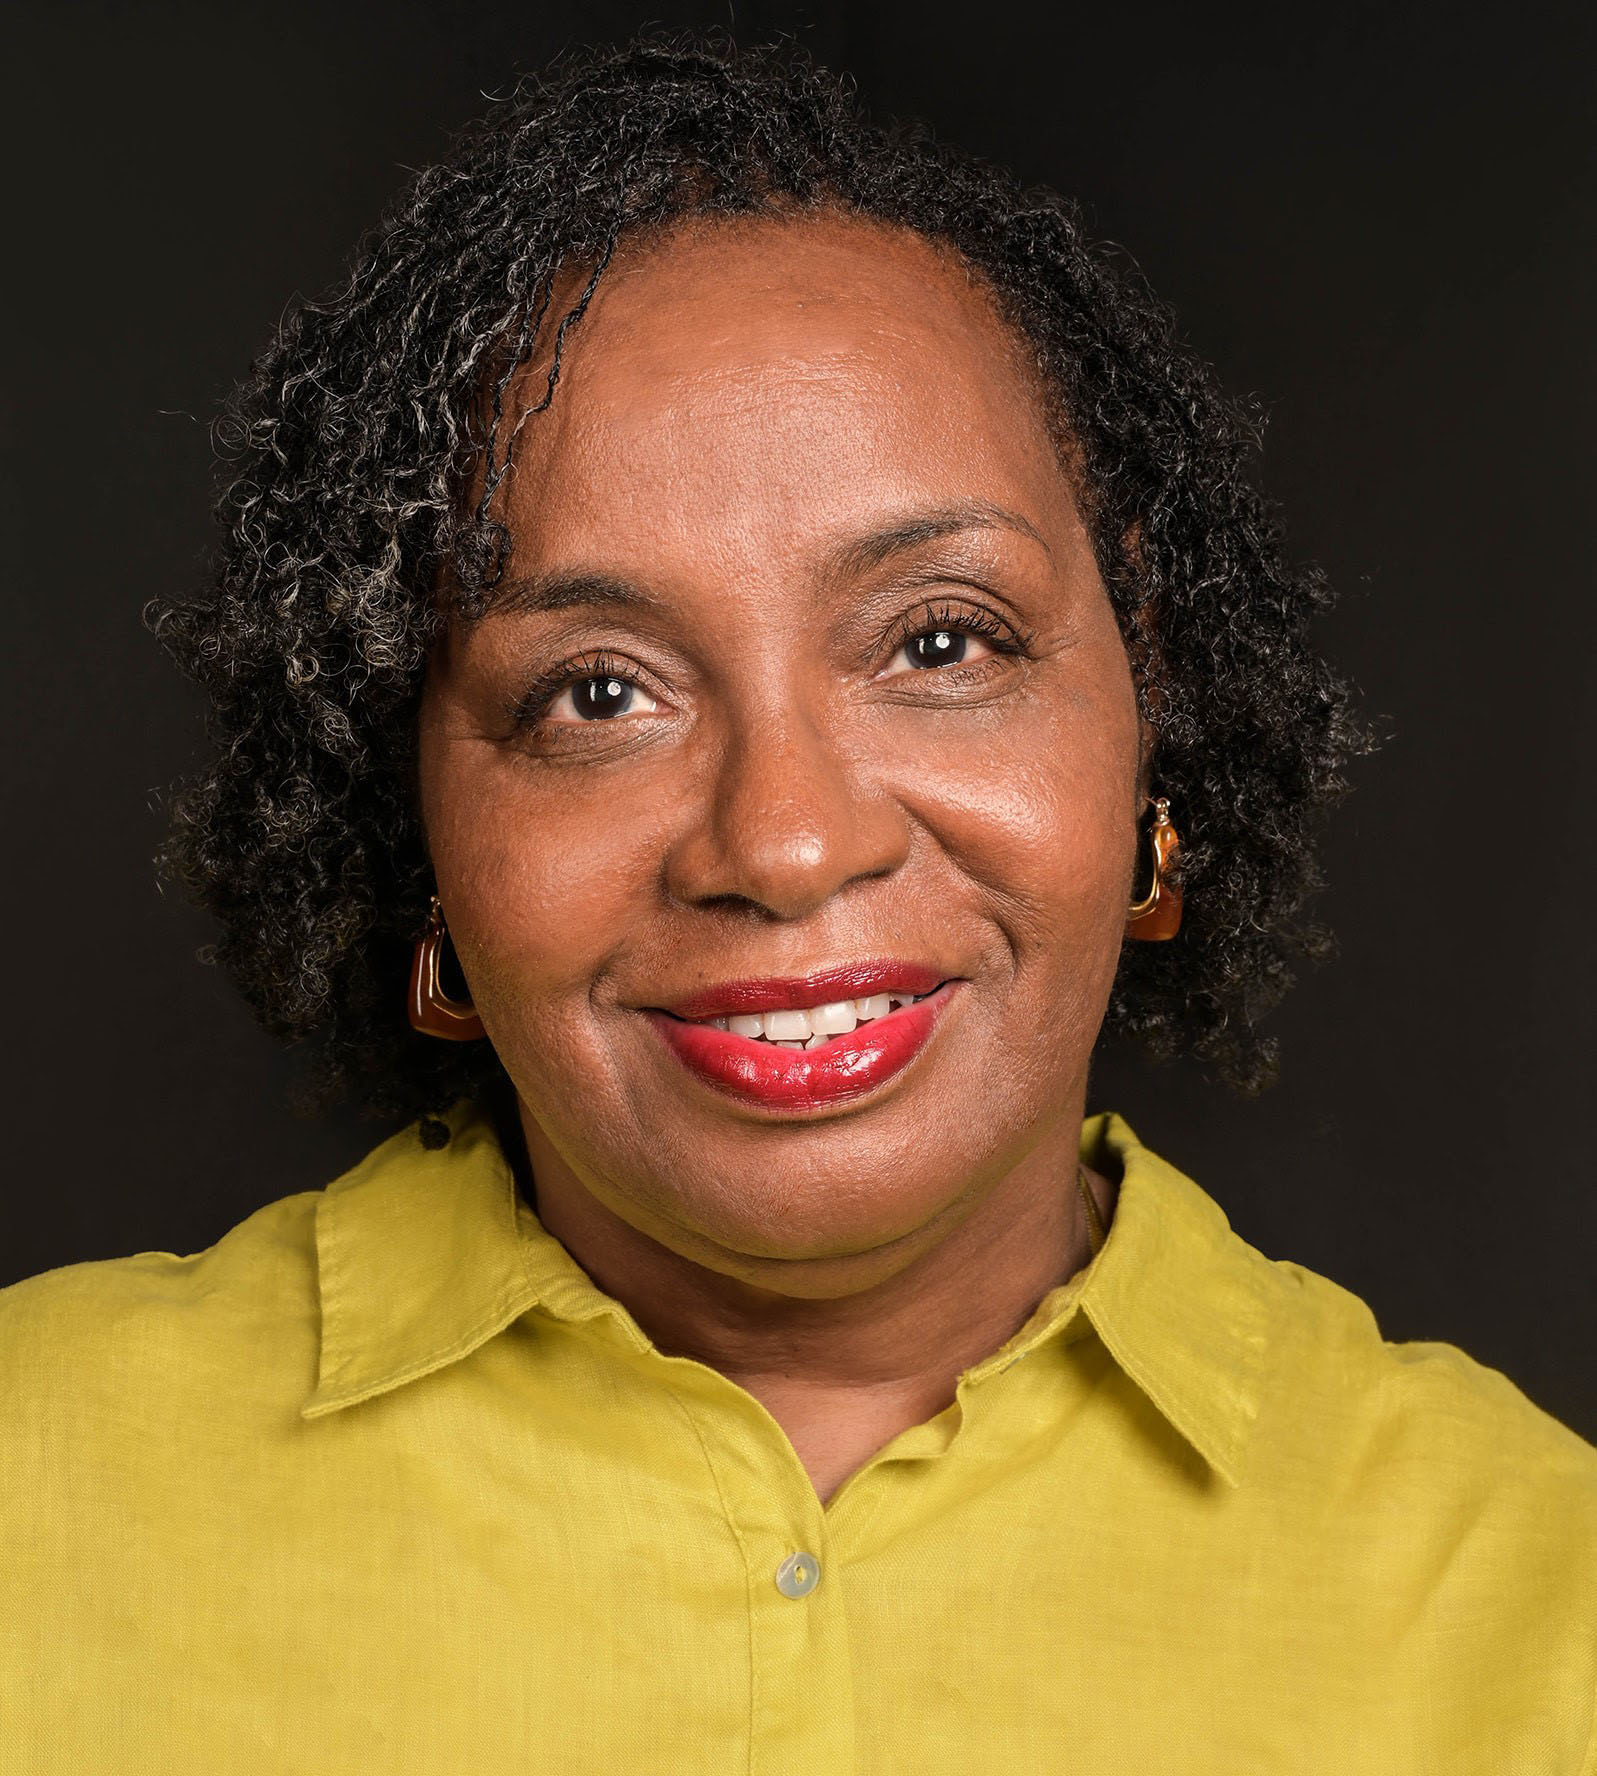 Headshot of a Black woman with red lipstick, gold earrings, and a yellow collard shirt. 